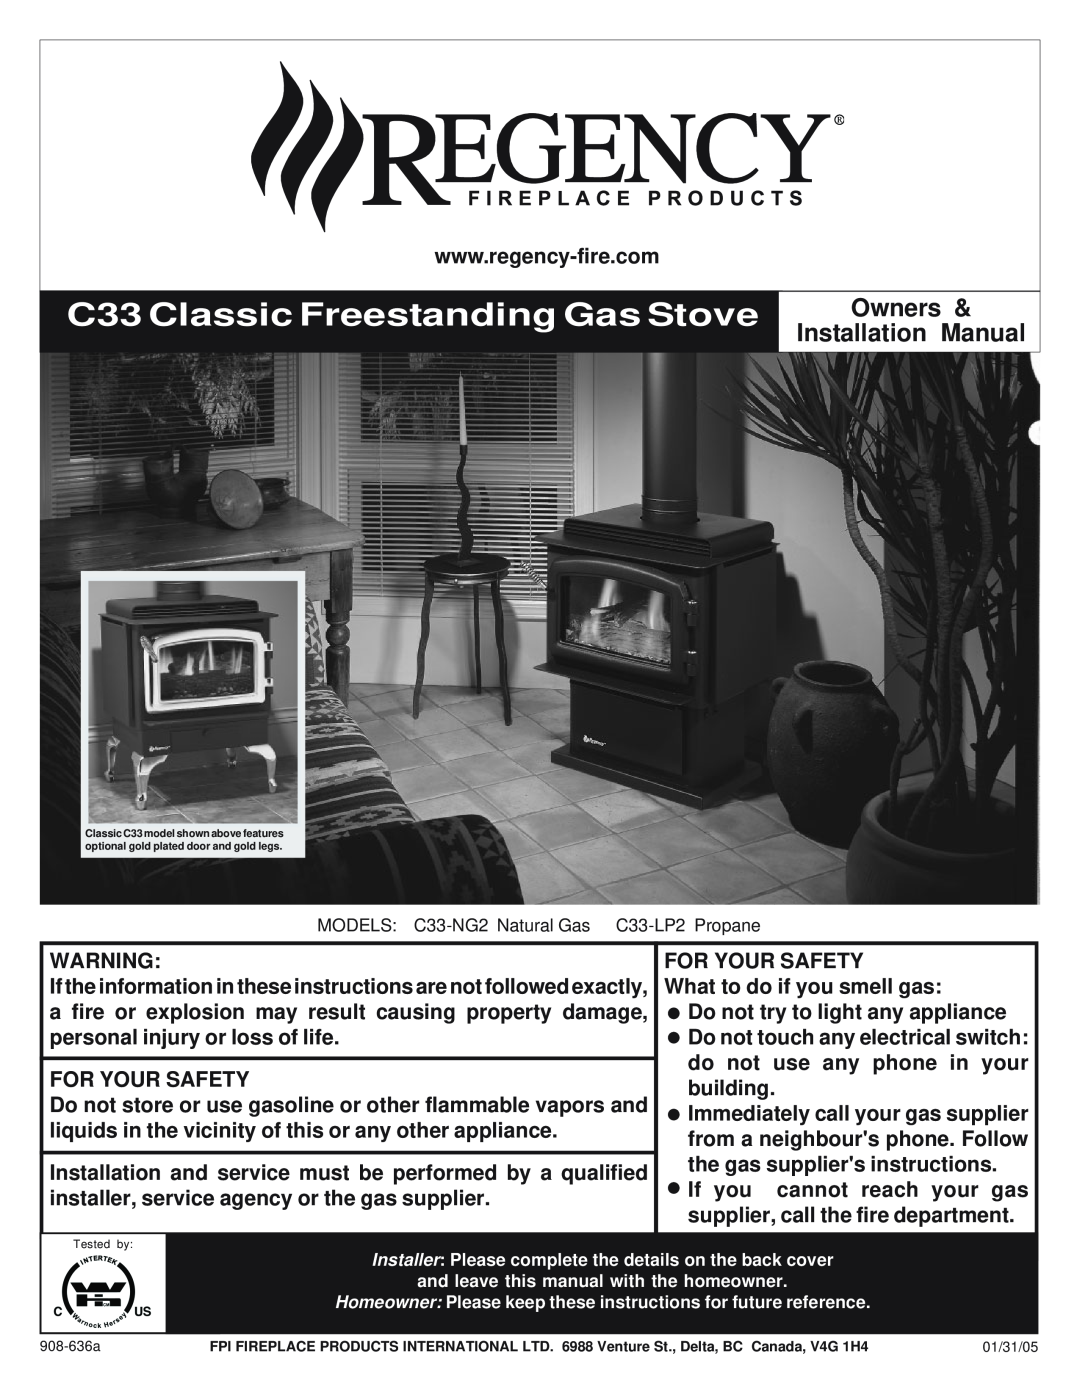 Regency C33-NG2, C33-LP2 installation manual C33 Classic Freestanding Gas Stove, Owners, Installation Manual 